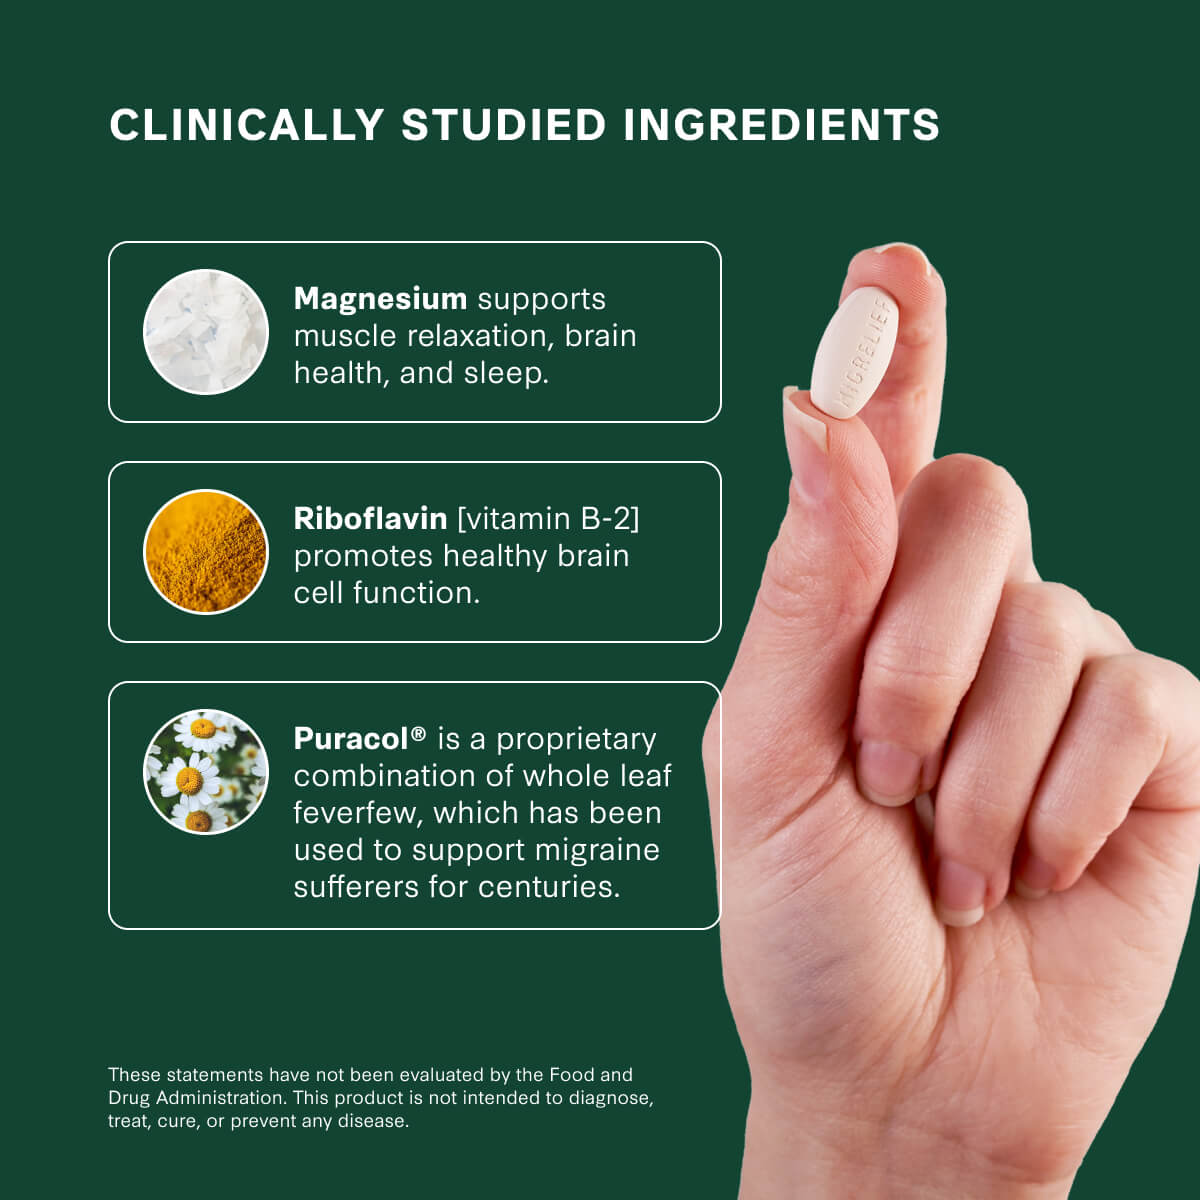 Key ingredients used in MigreLief supplements include magnesium, riboflavin, and Puracol®.